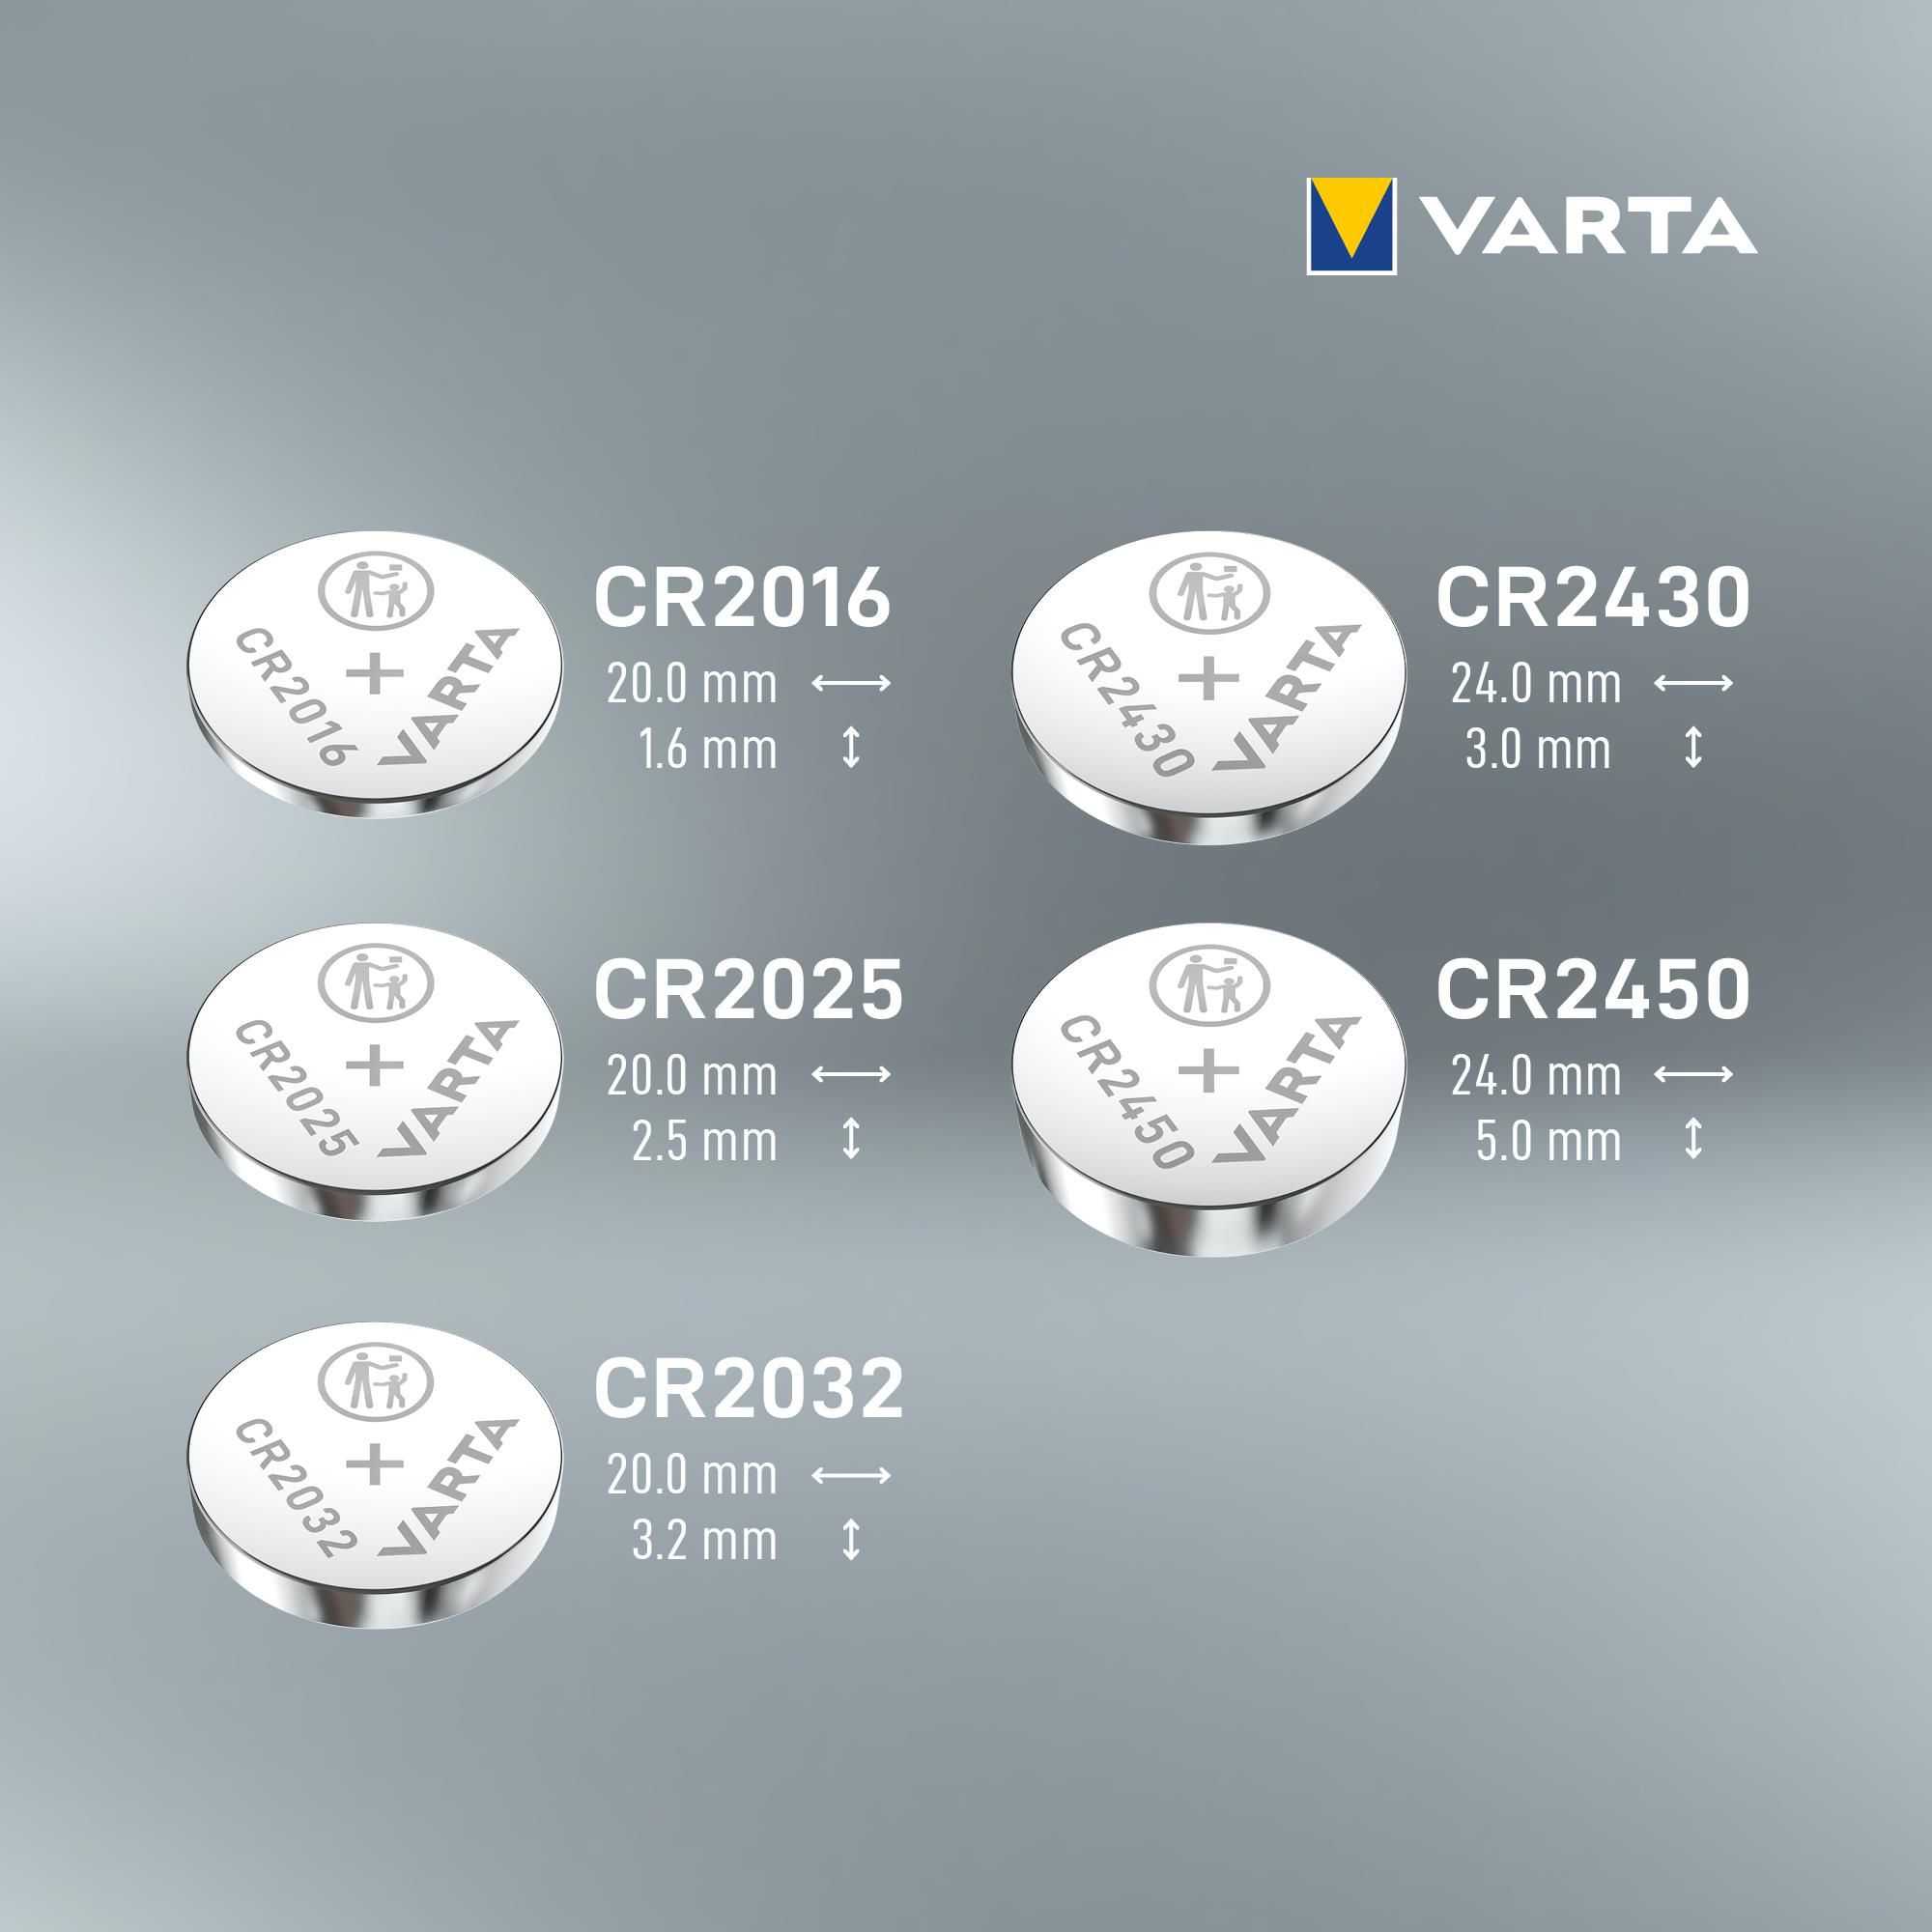 Varta CR2032 Coin cell batteries, Pack of 2